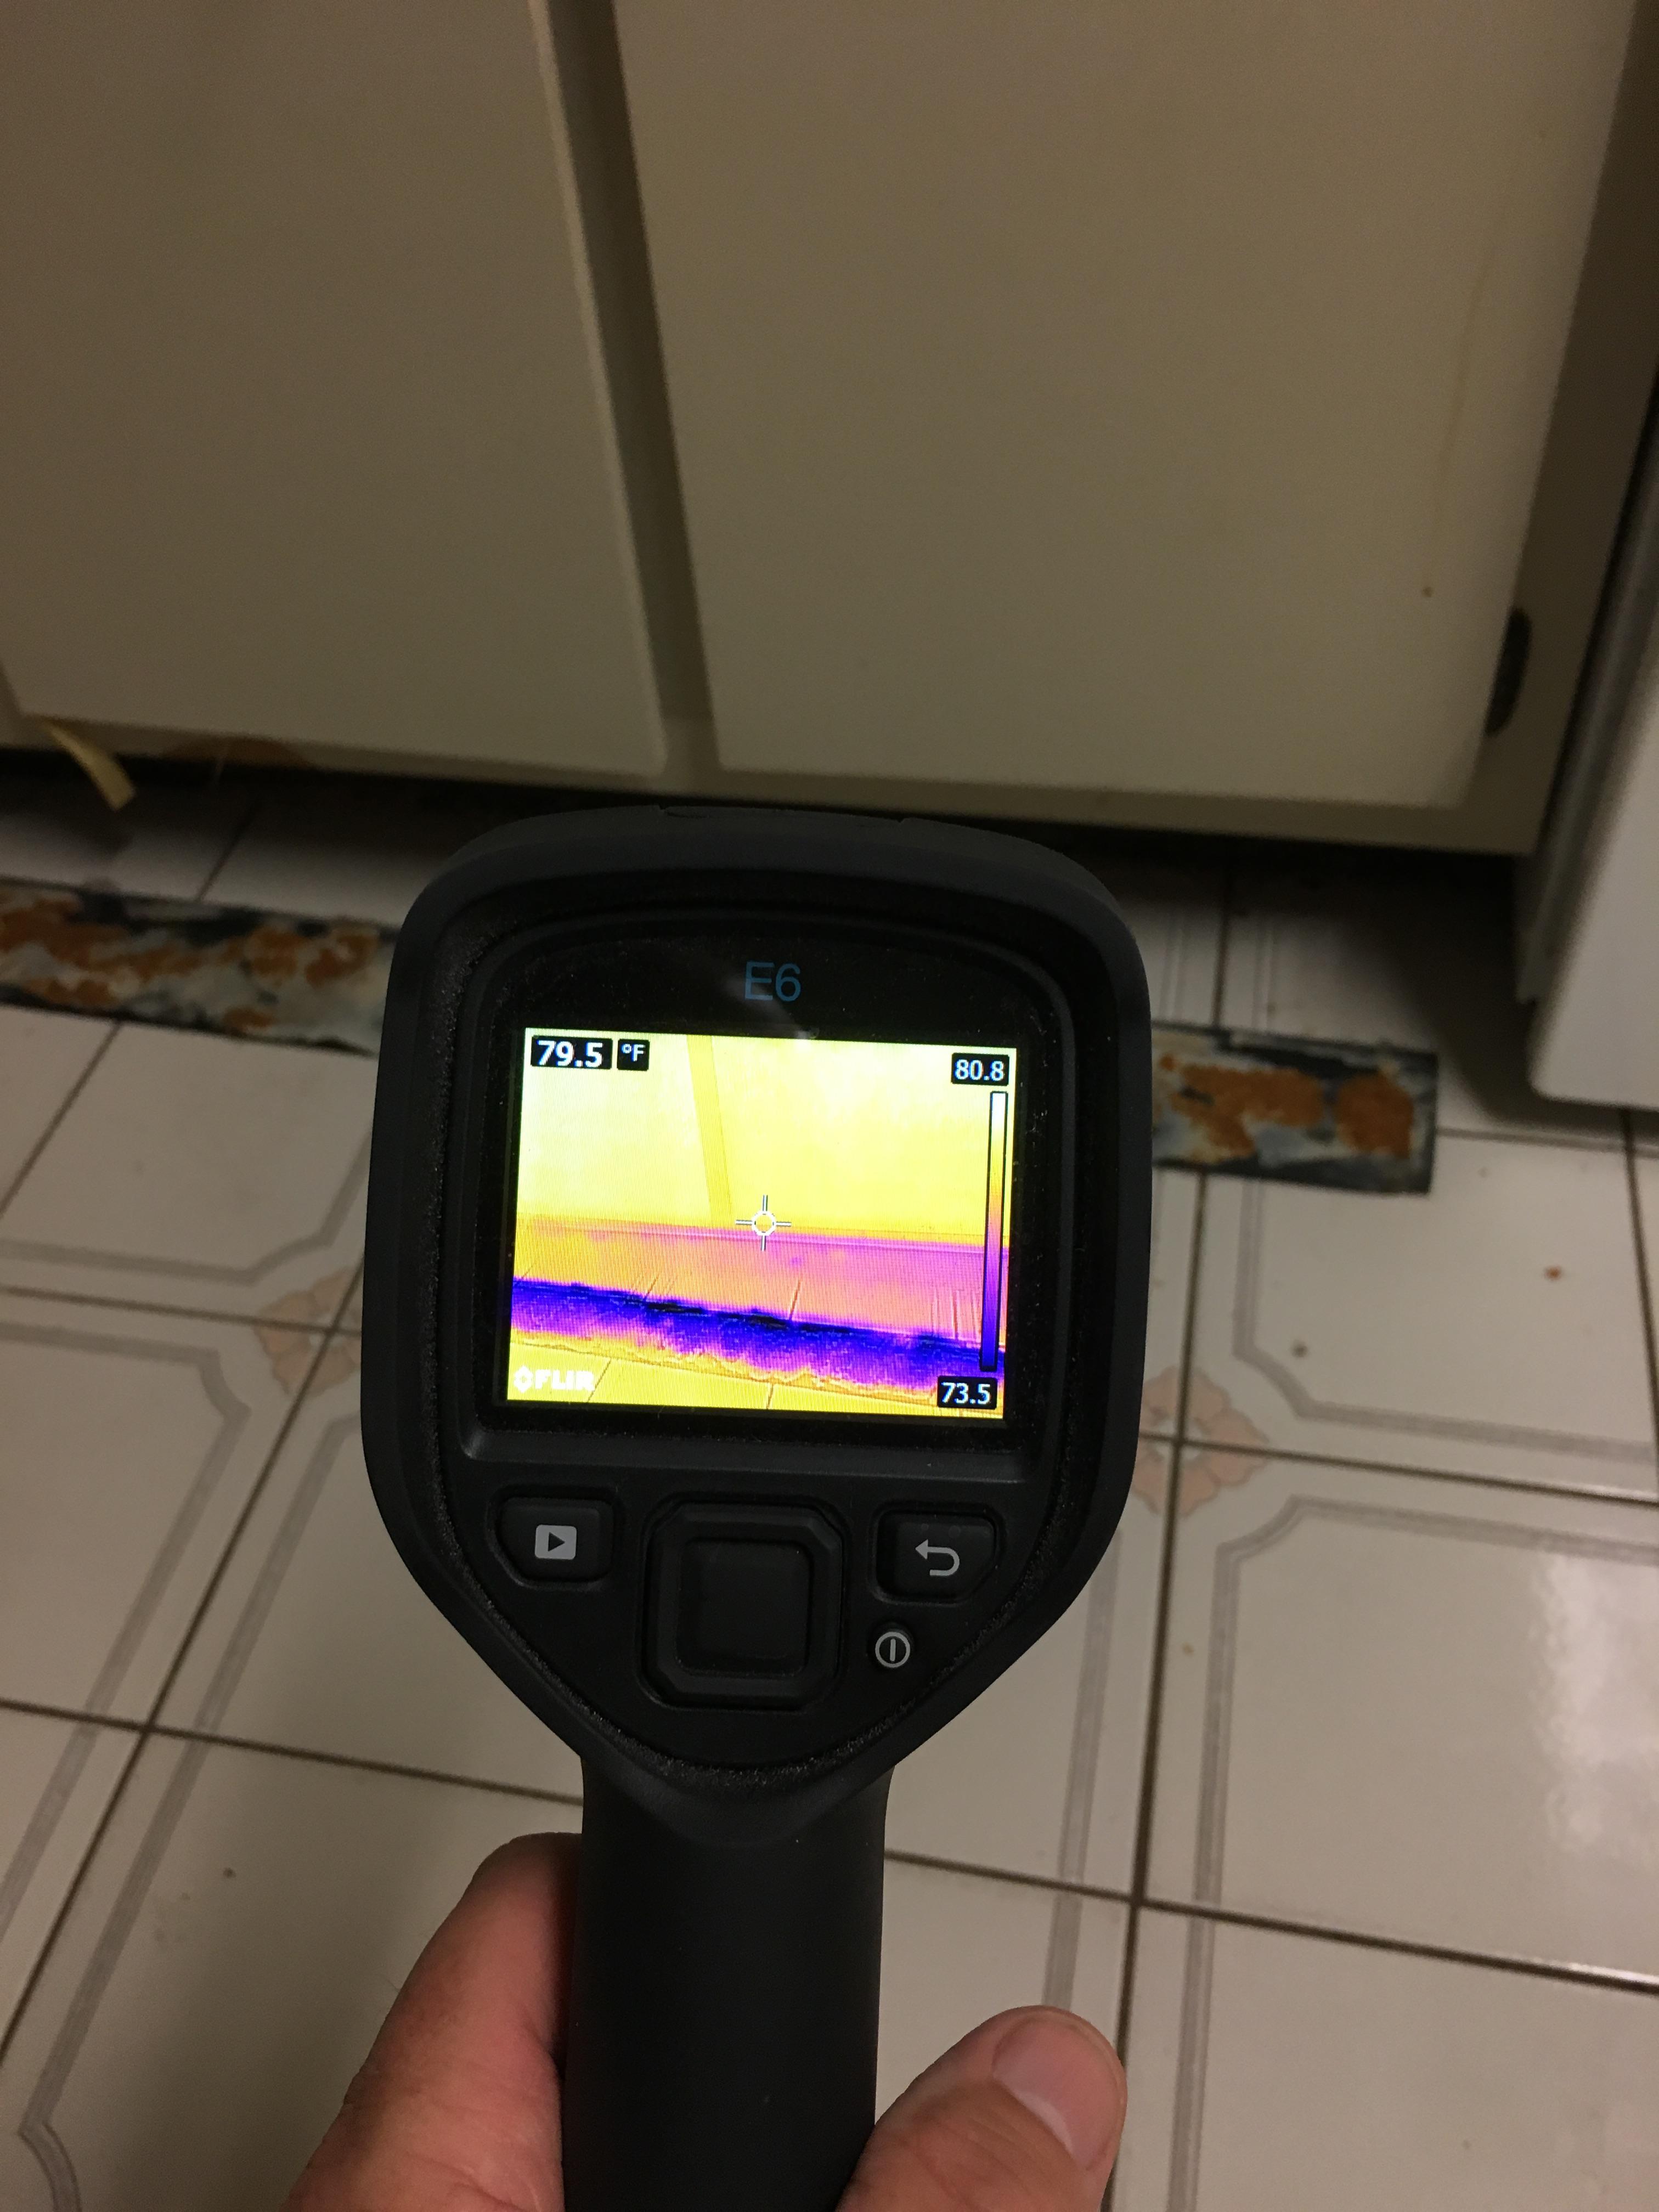 Breaking out the thermal camera to check for moisture after a water loss.